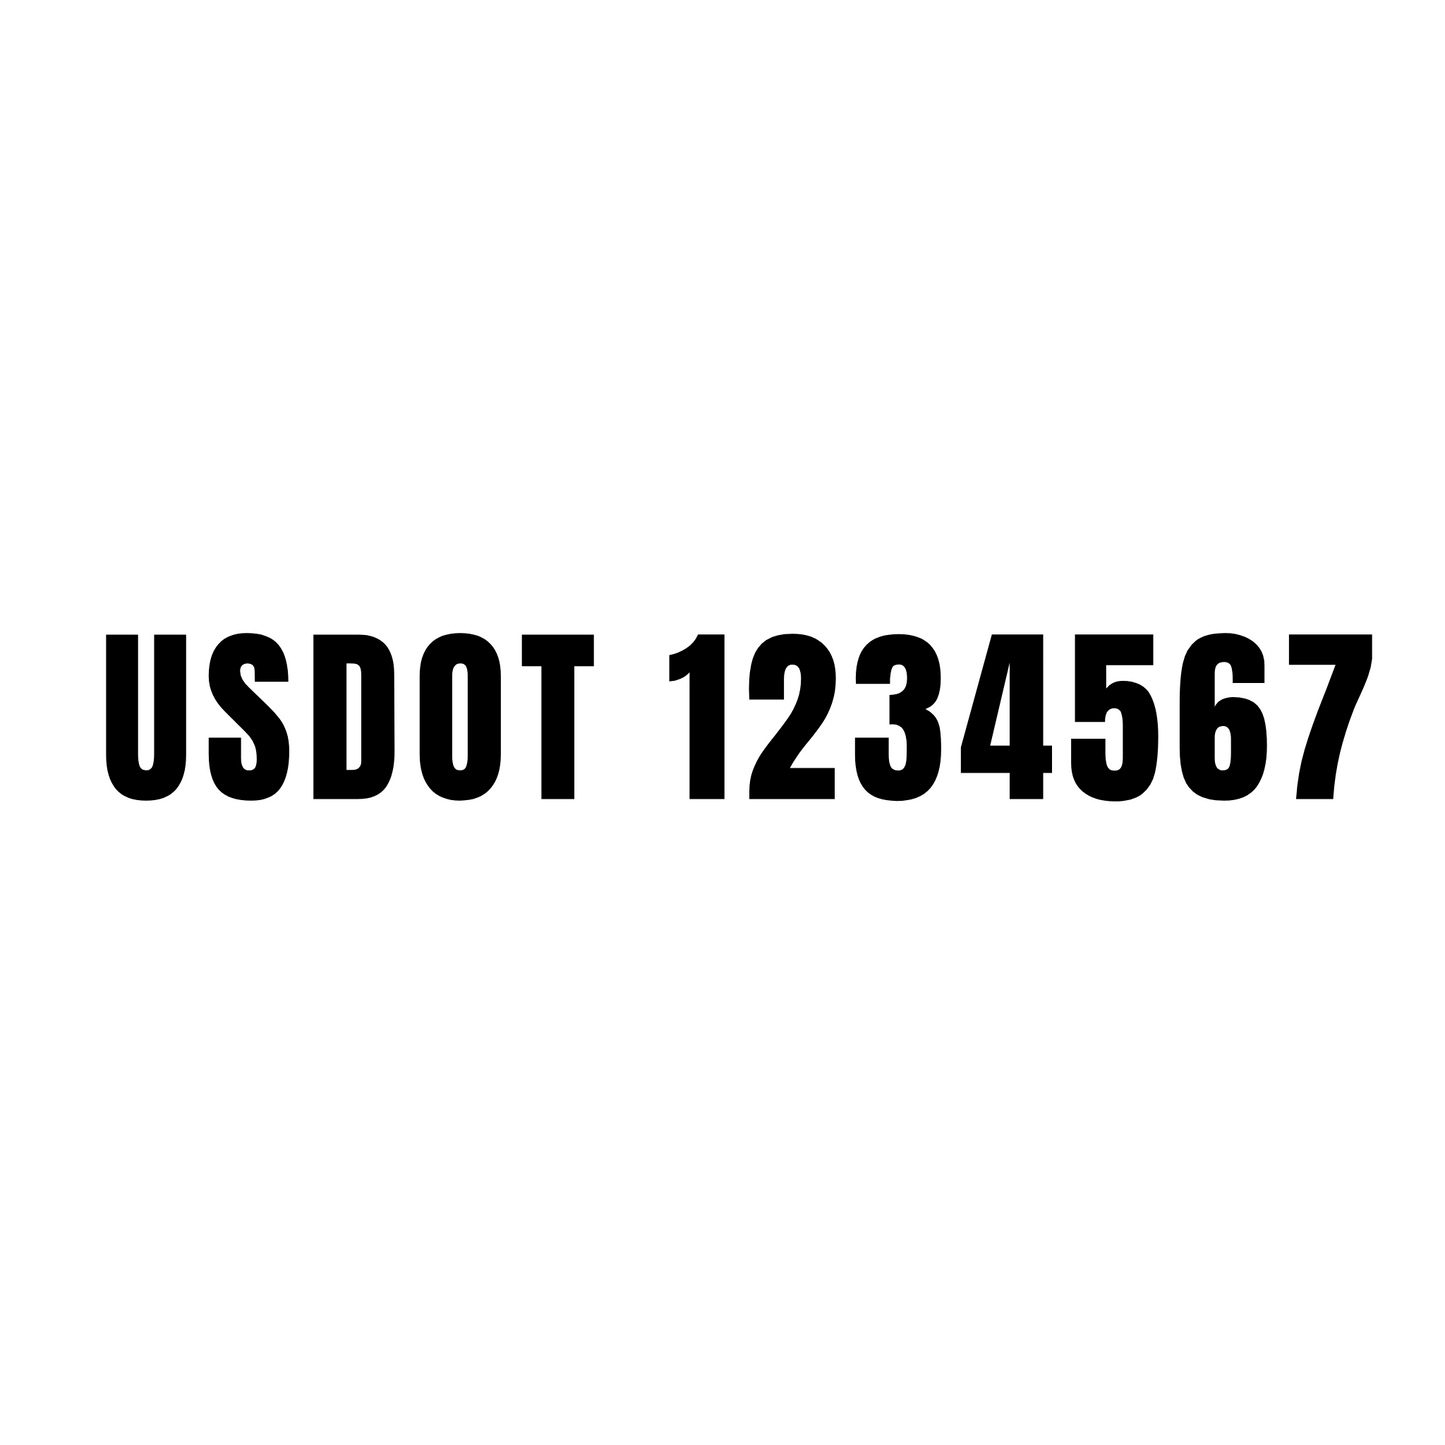 Custom USDOT Decals for Semi-Trucks – Durable, Compliant, and High-Quality